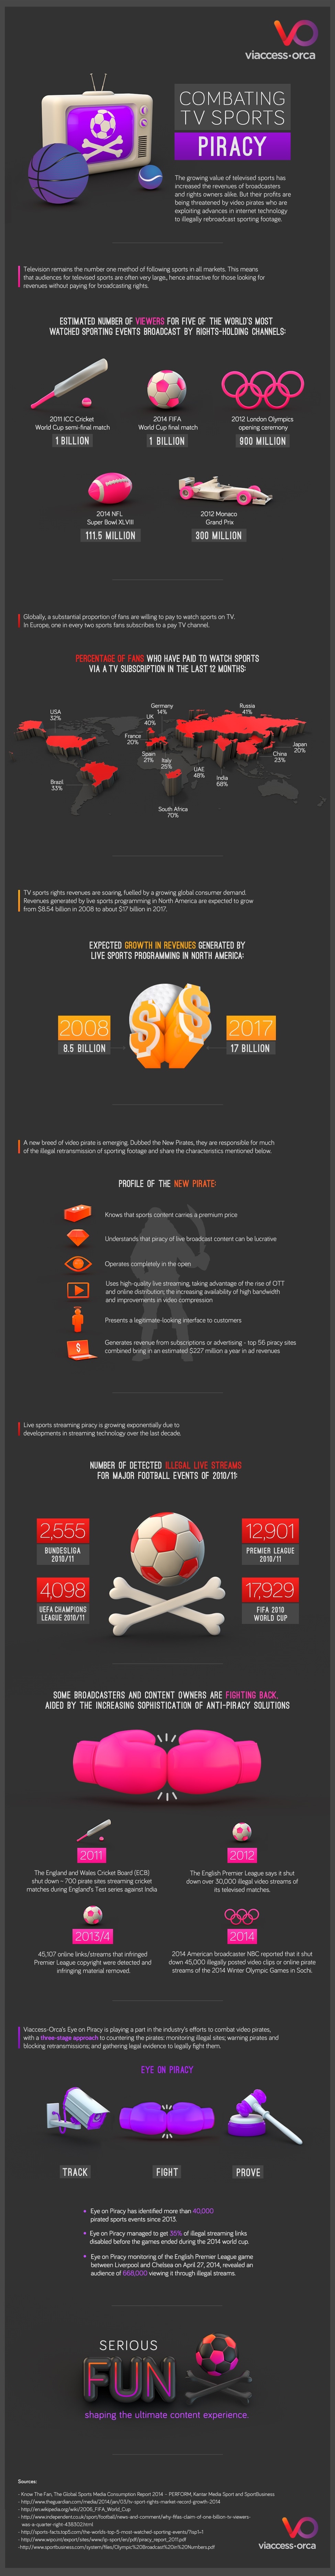 Infographic Combating TV Sports Piracy